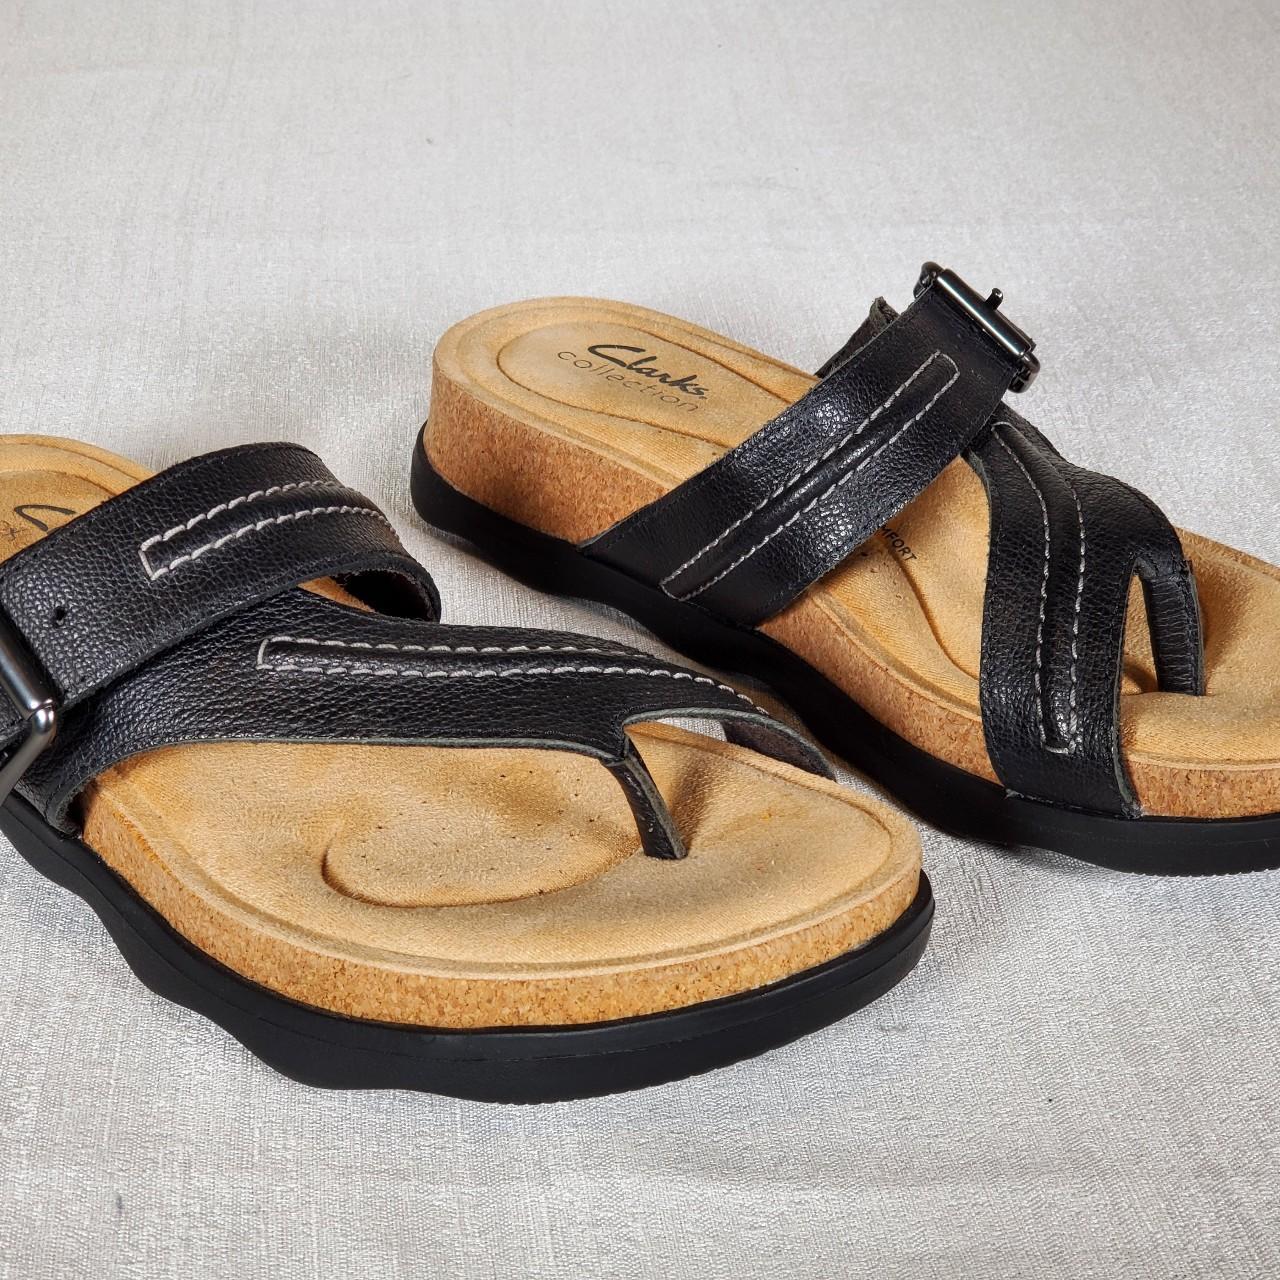 Clarks leather sandals (fits 7)